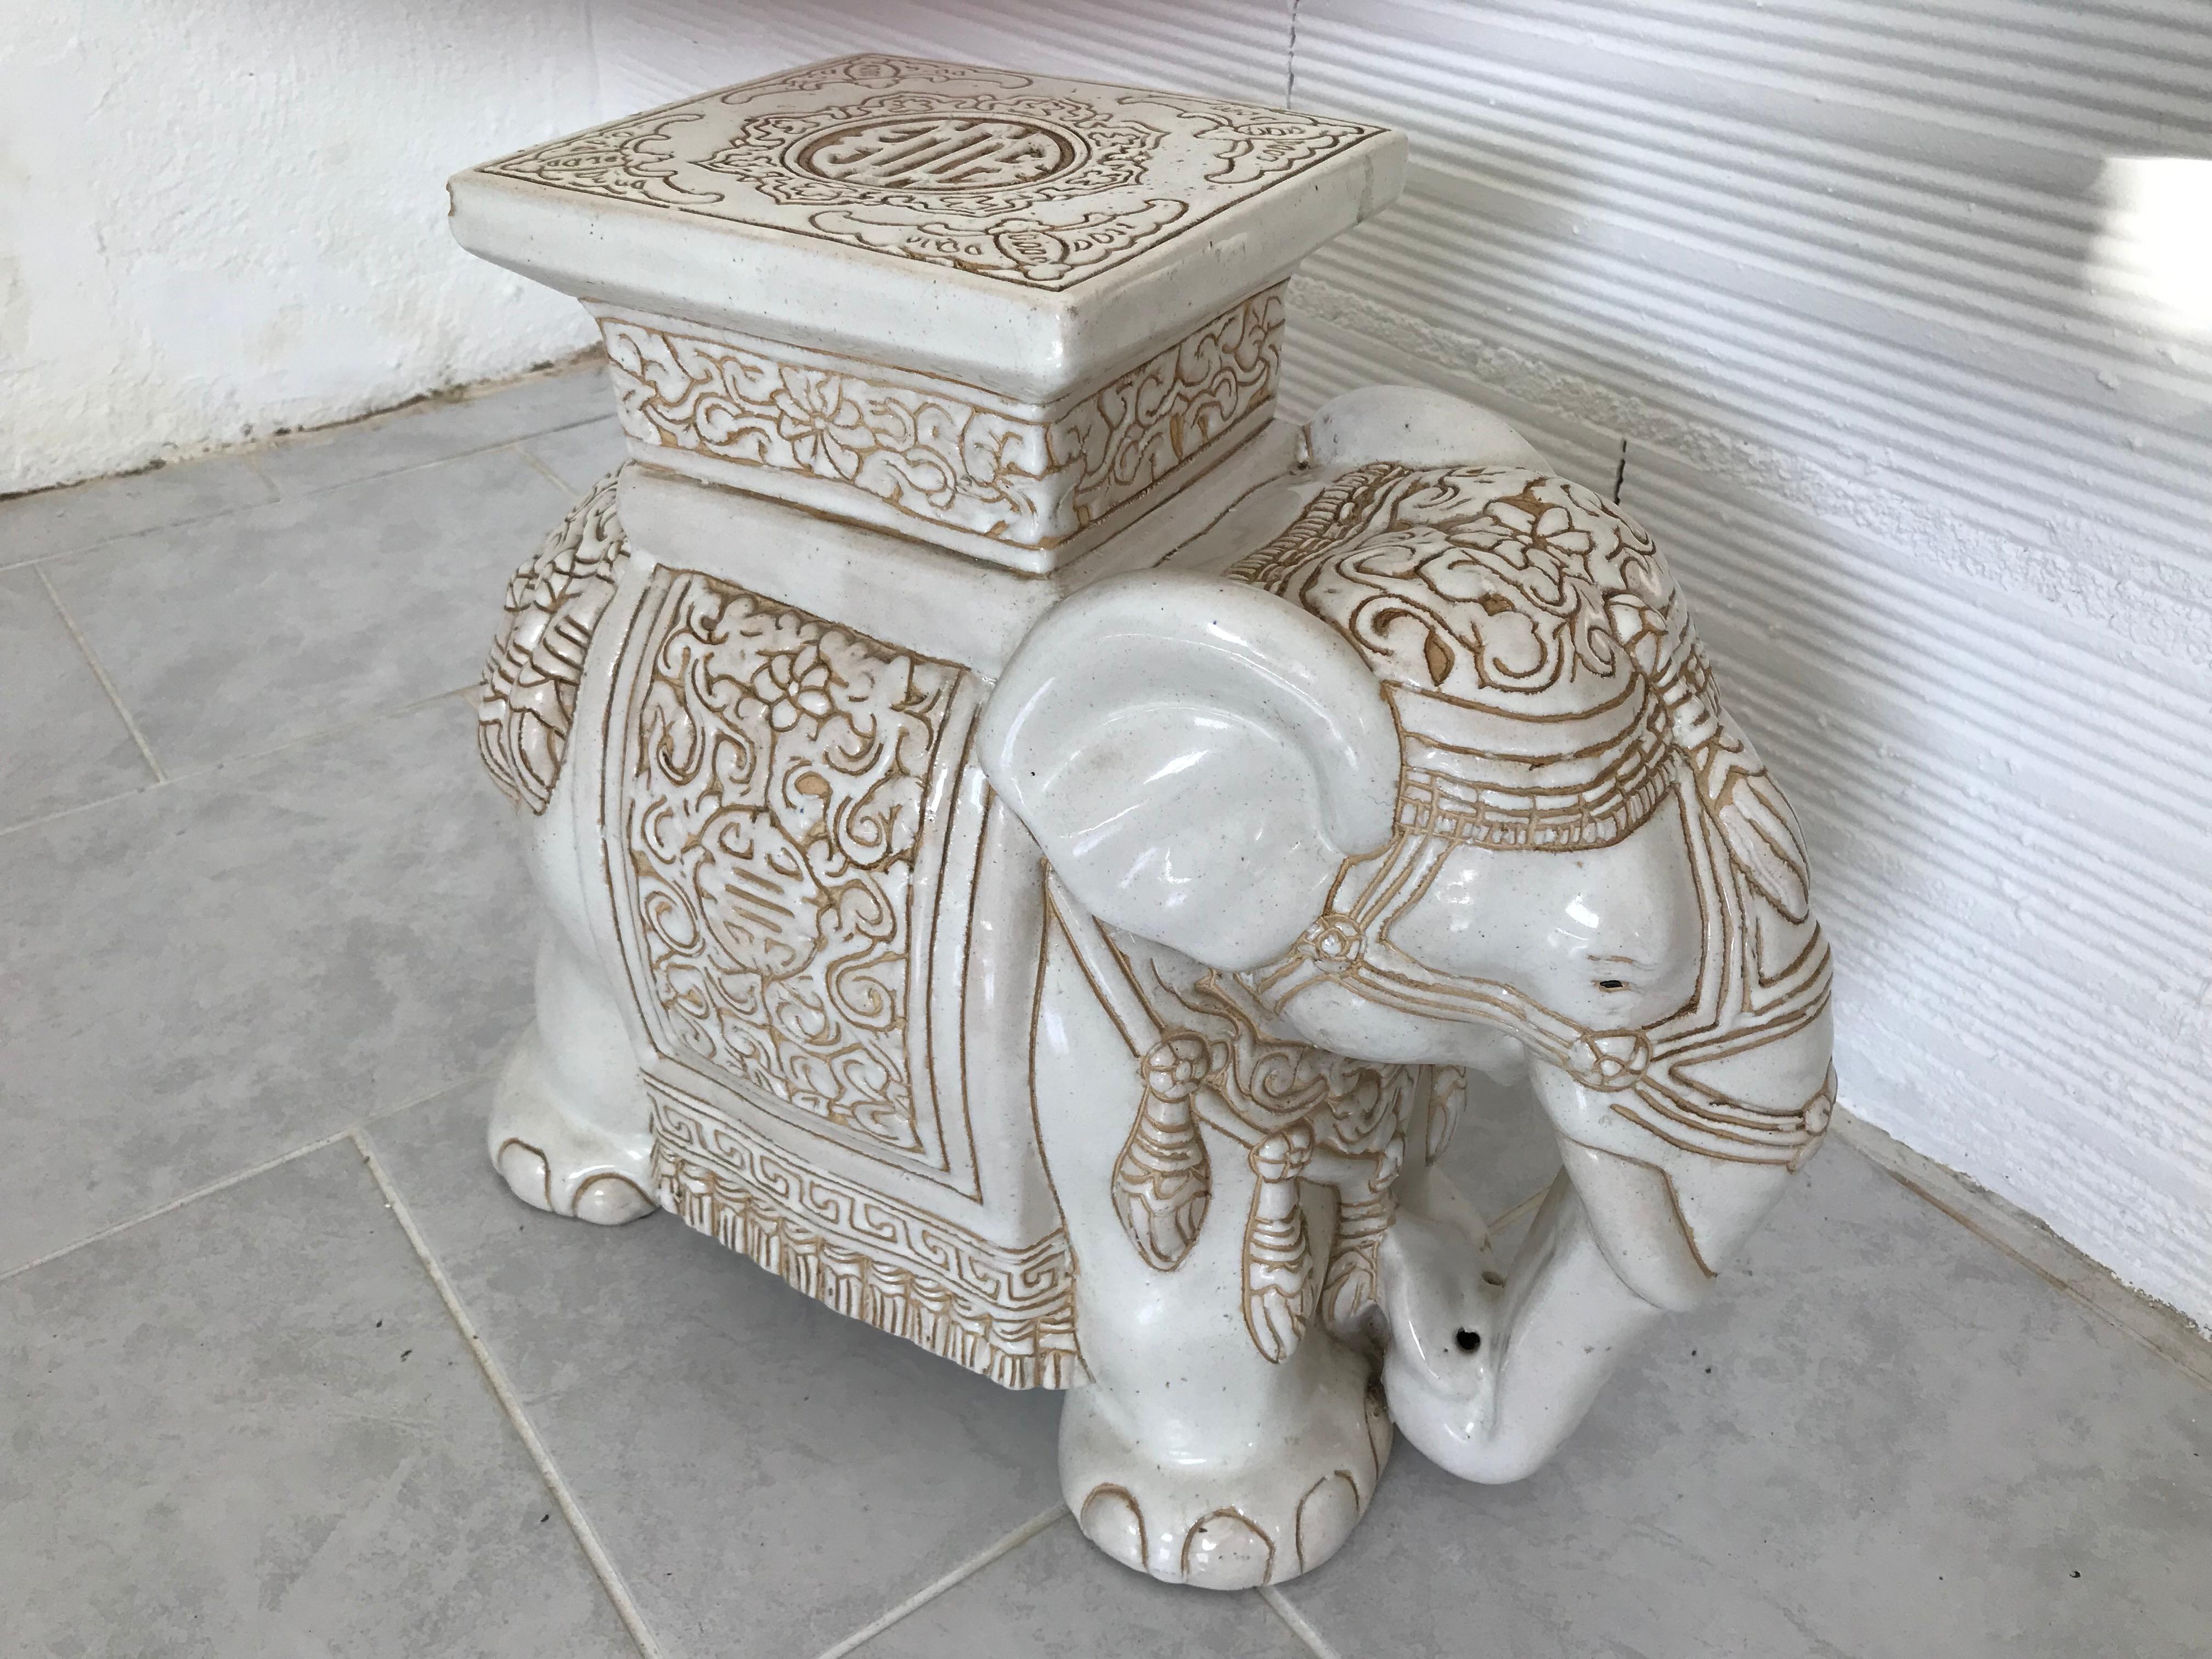 This Asian elephant was manufactured, circa 1960s-1970s and features a Classic design with rare colors. Very often, items like these feature multiple colors while this one was kept very basic in white and sand. Very nice addition to any room as a